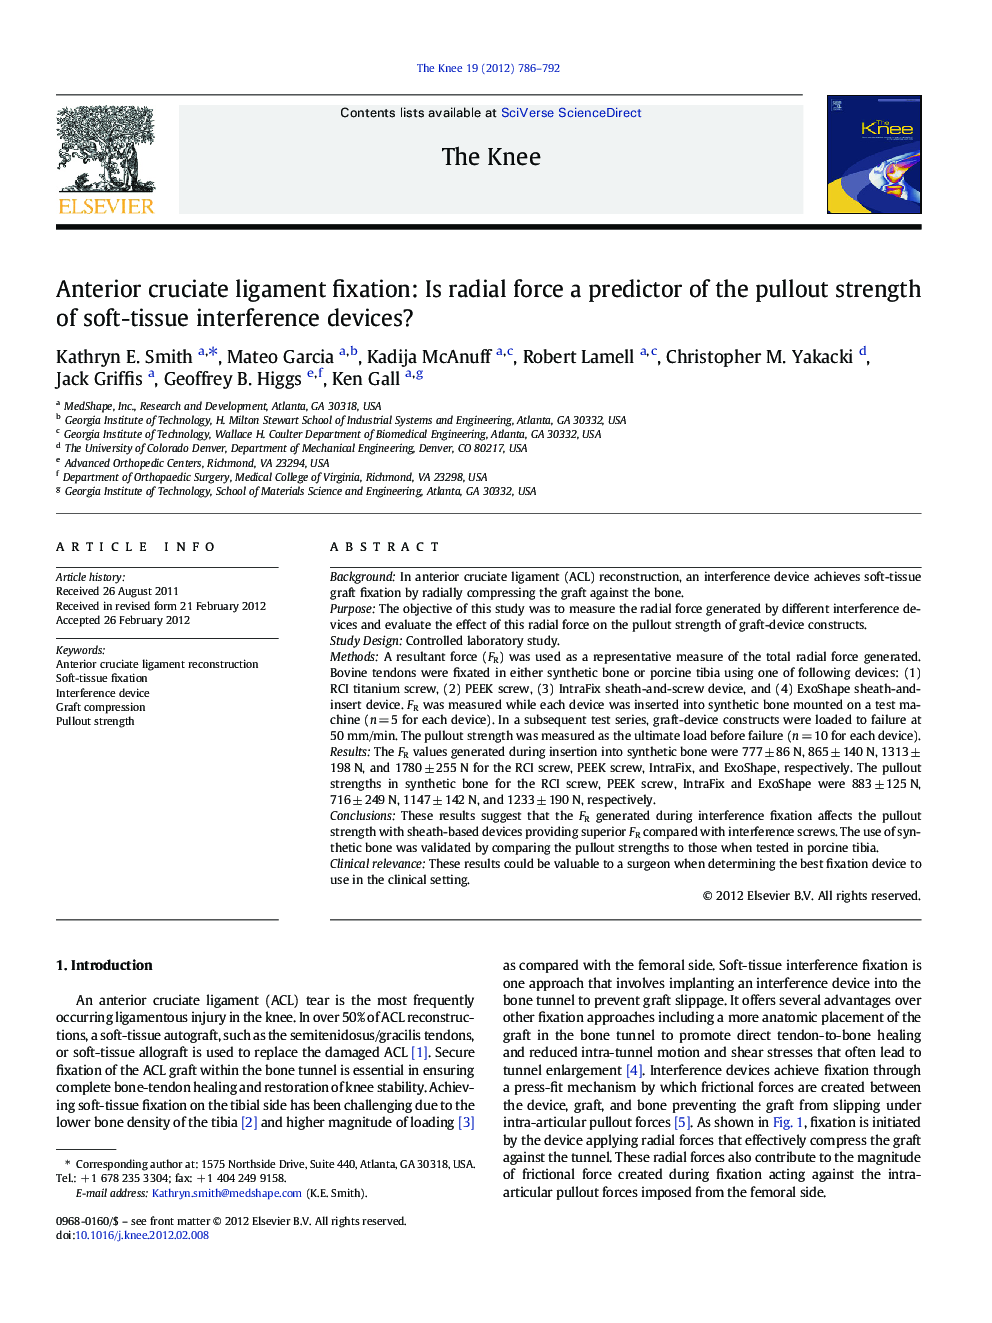 Anterior cruciate ligament fixation: Is radial force a predictor of the pullout strength of soft-tissue interference devices?